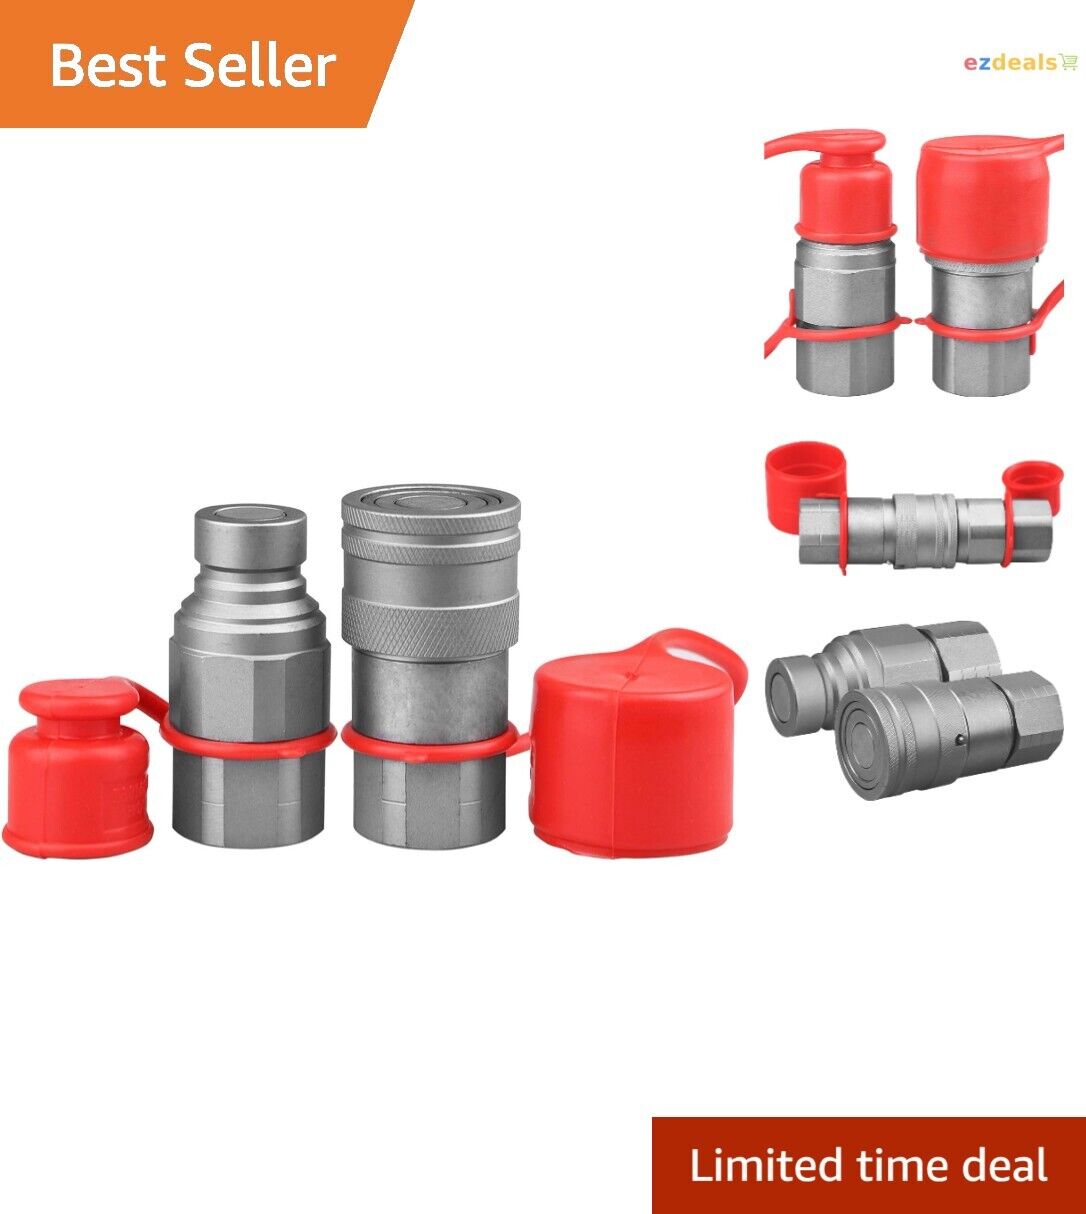 Hydraulic Quick Connect Couplers - Improved Design, High Flow - 1/2" NPT Body Без бренда